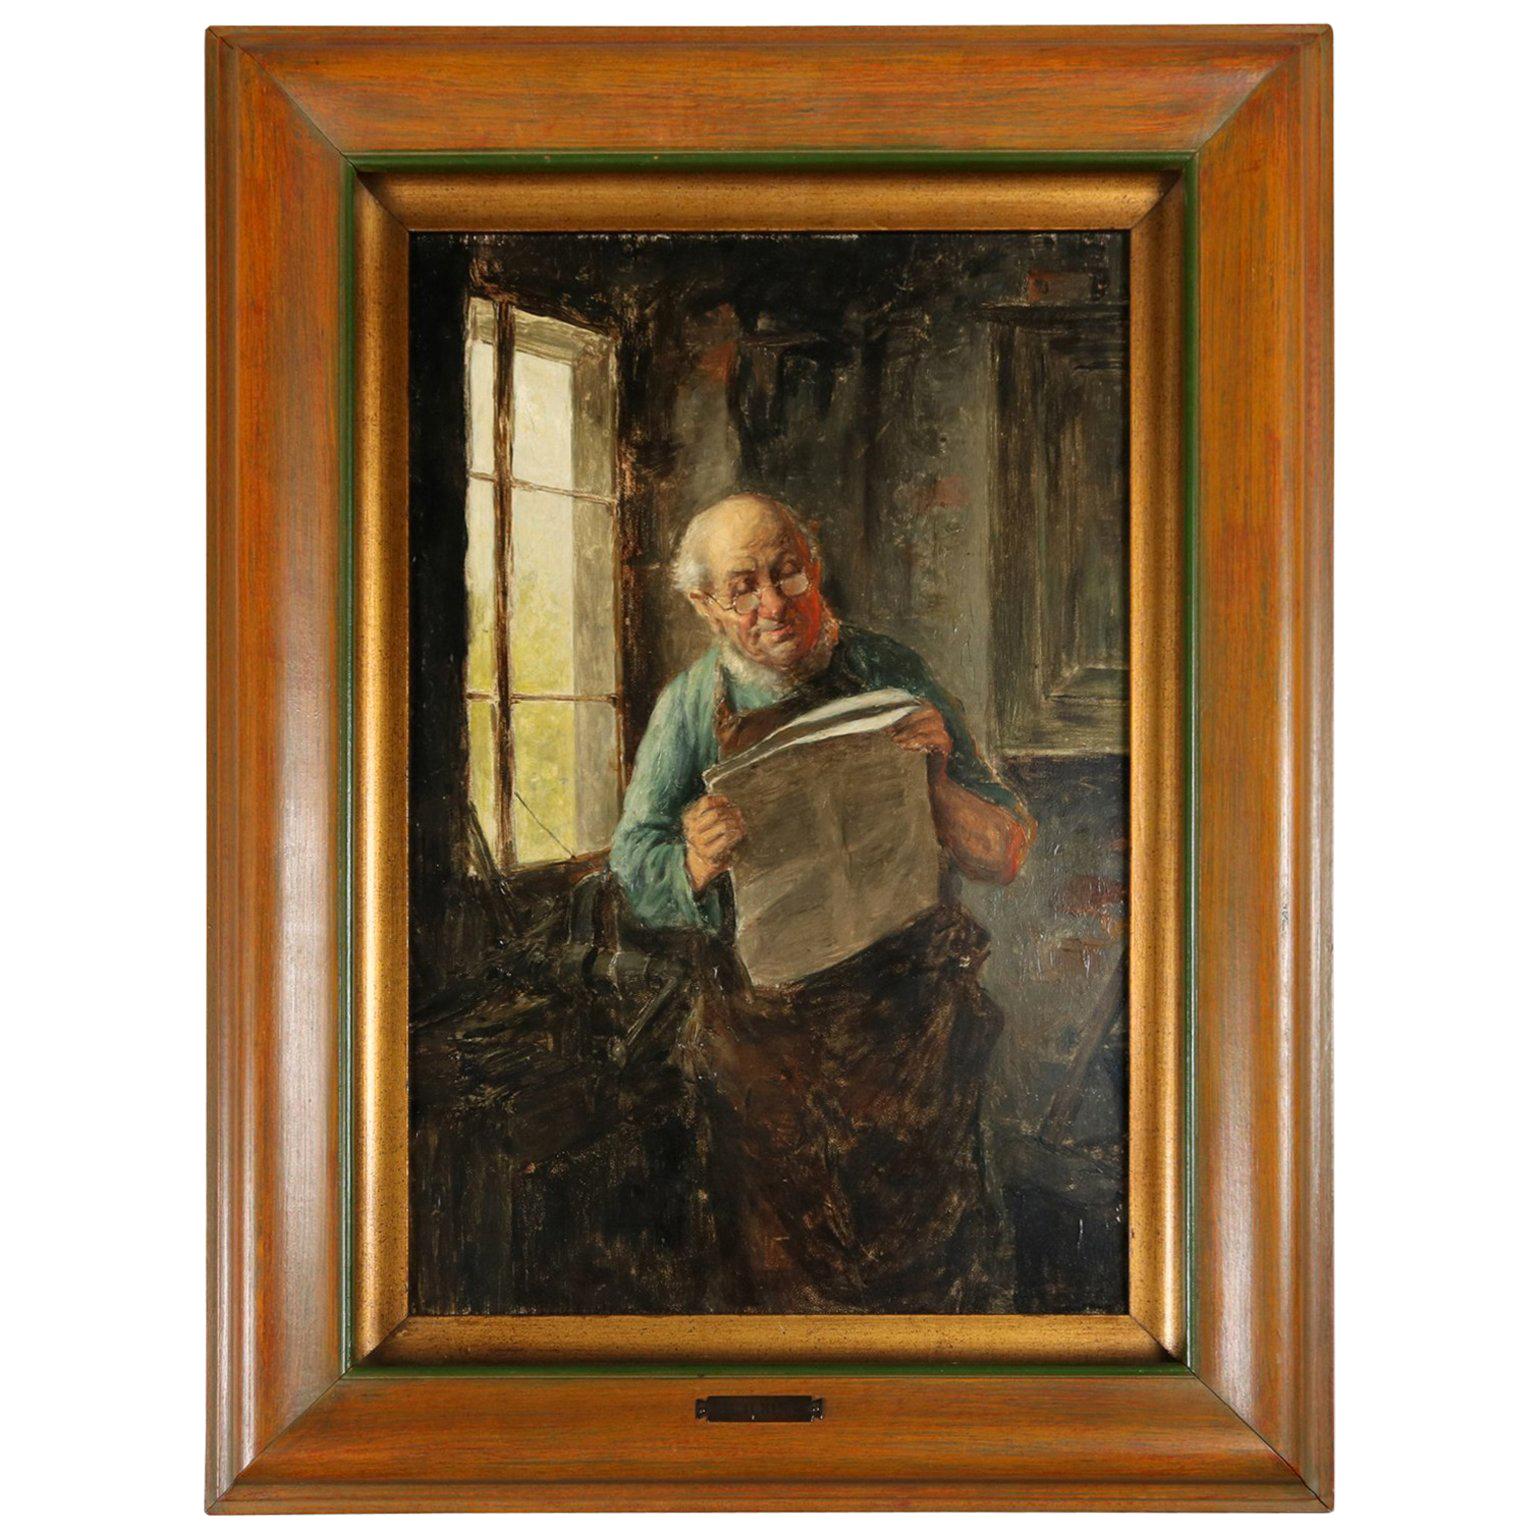 Antique Oil on Board Painting "Blacksmith" by R. Alvin, 19th Century